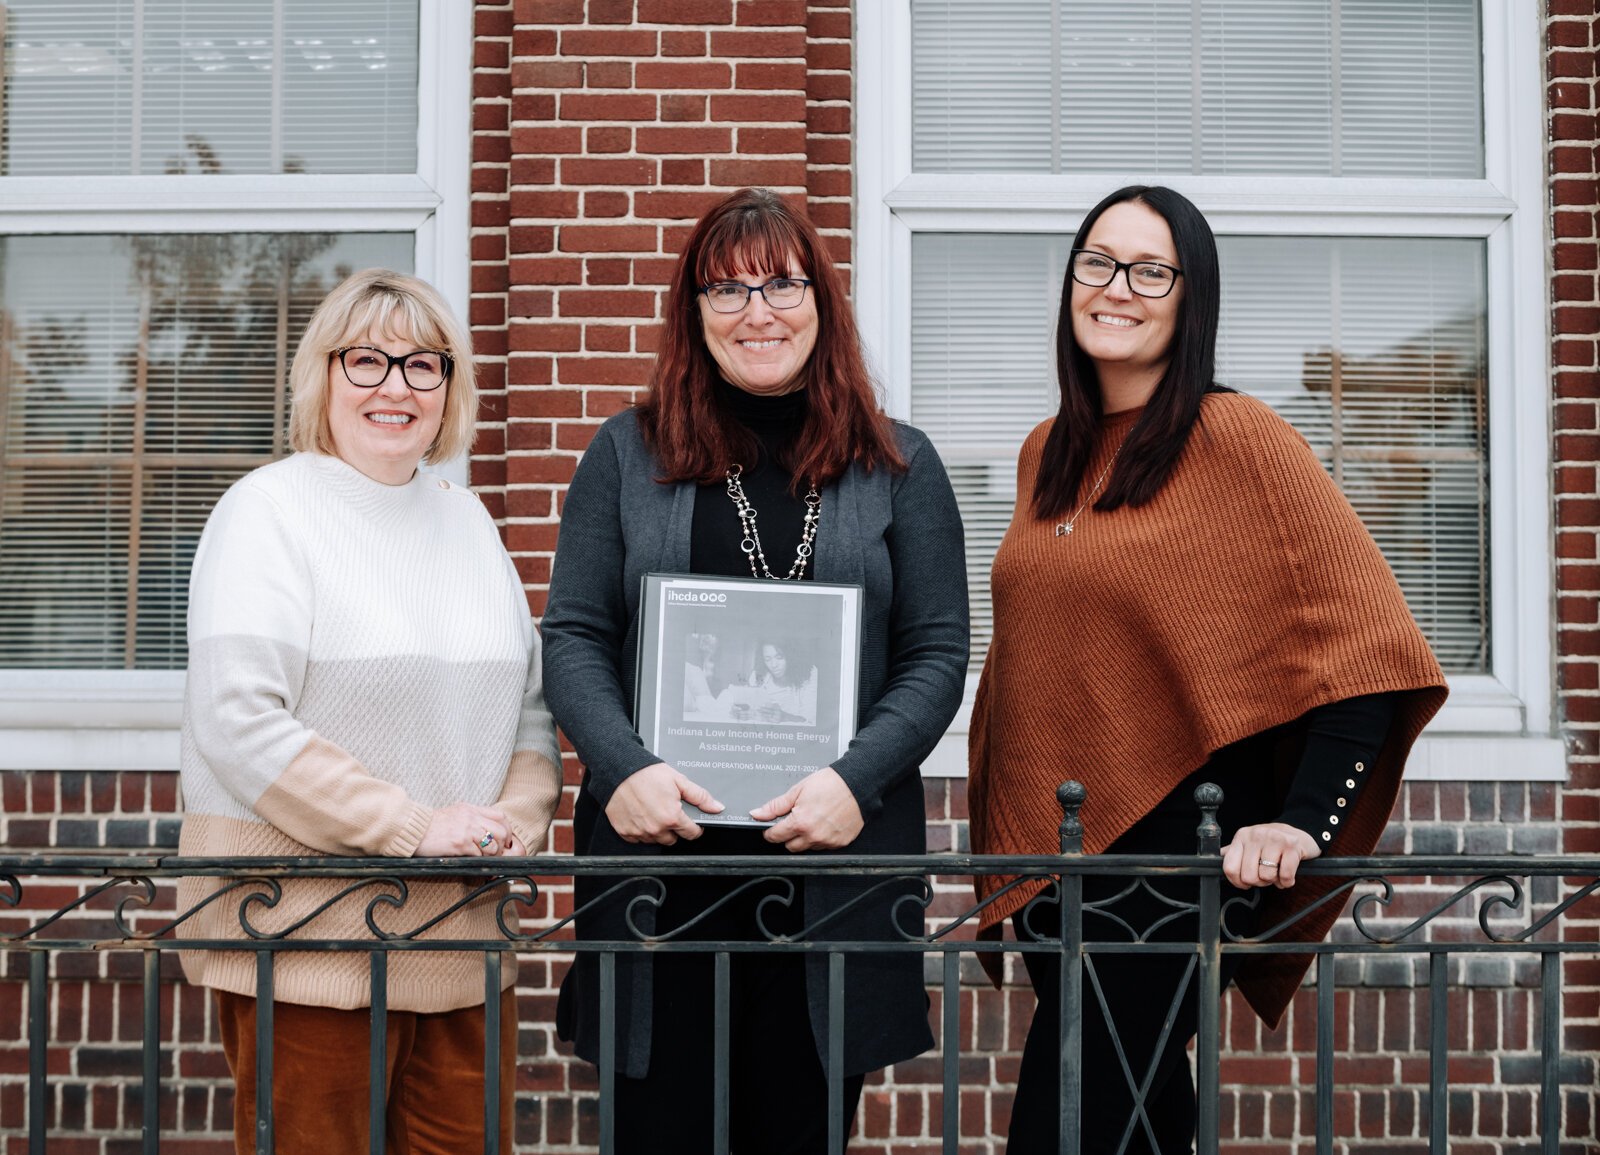 Brightpoint VP of Community Services, Pam Brookshire, left, and Family Support Services Manager, Lesa Cassel, center, with Dana Berkes, right, Public Affairs & Economic Development Manager at NIPSCO in front of Brightpoint at 227 E. Washington Blvd.